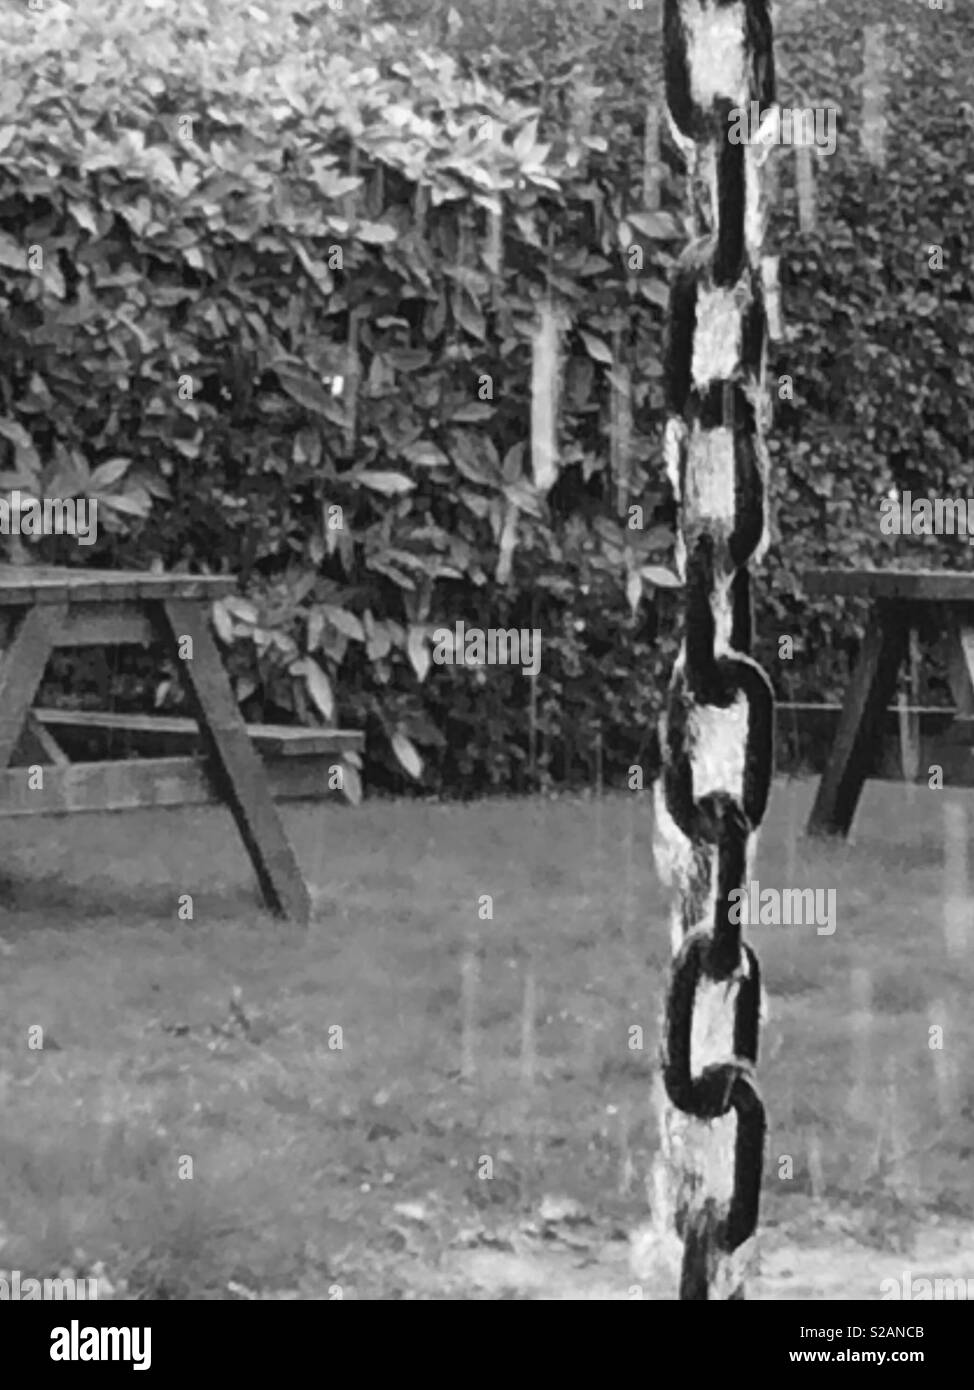 Rain water running down a chain in black and white Stock Photo